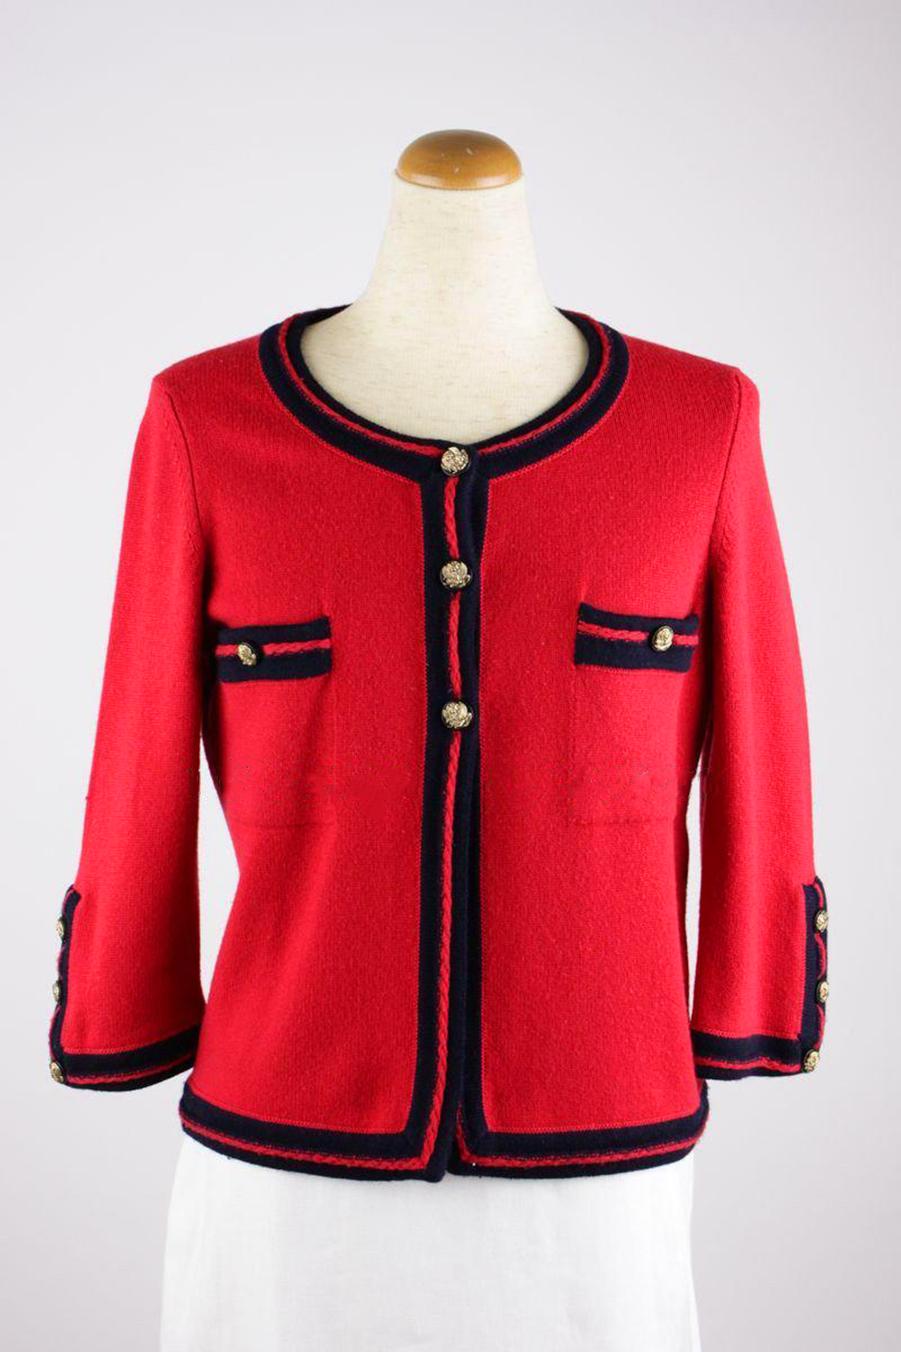 Chanel Kate Moss Style Venice Collection Cardigan  6